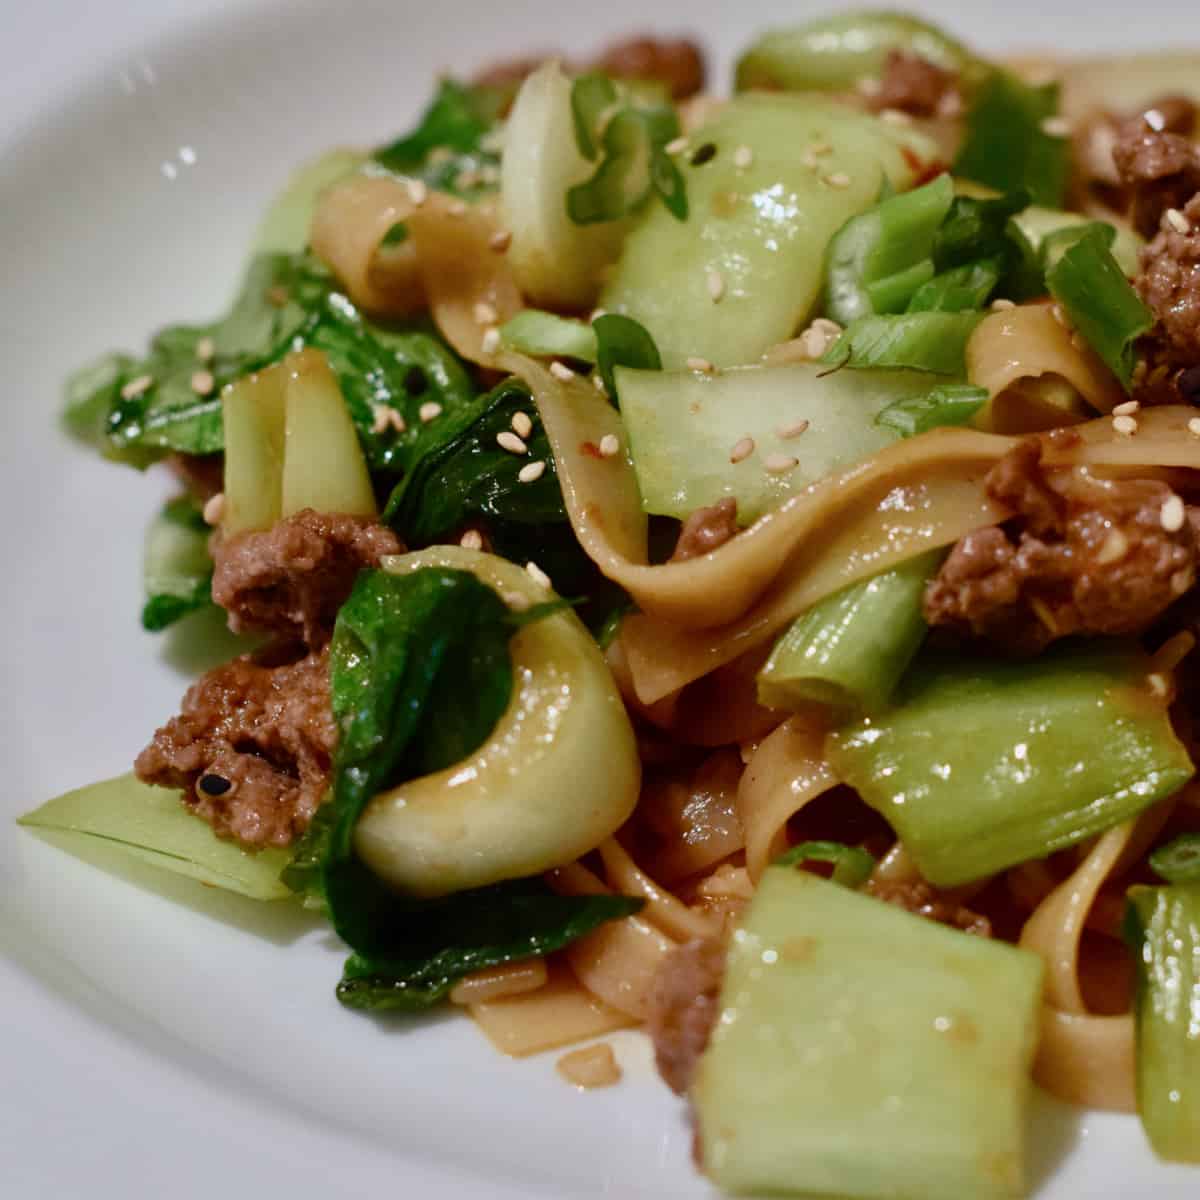 Bok Choy and ground lamb simmer in a sauce and are served over noodles in a white bowl.